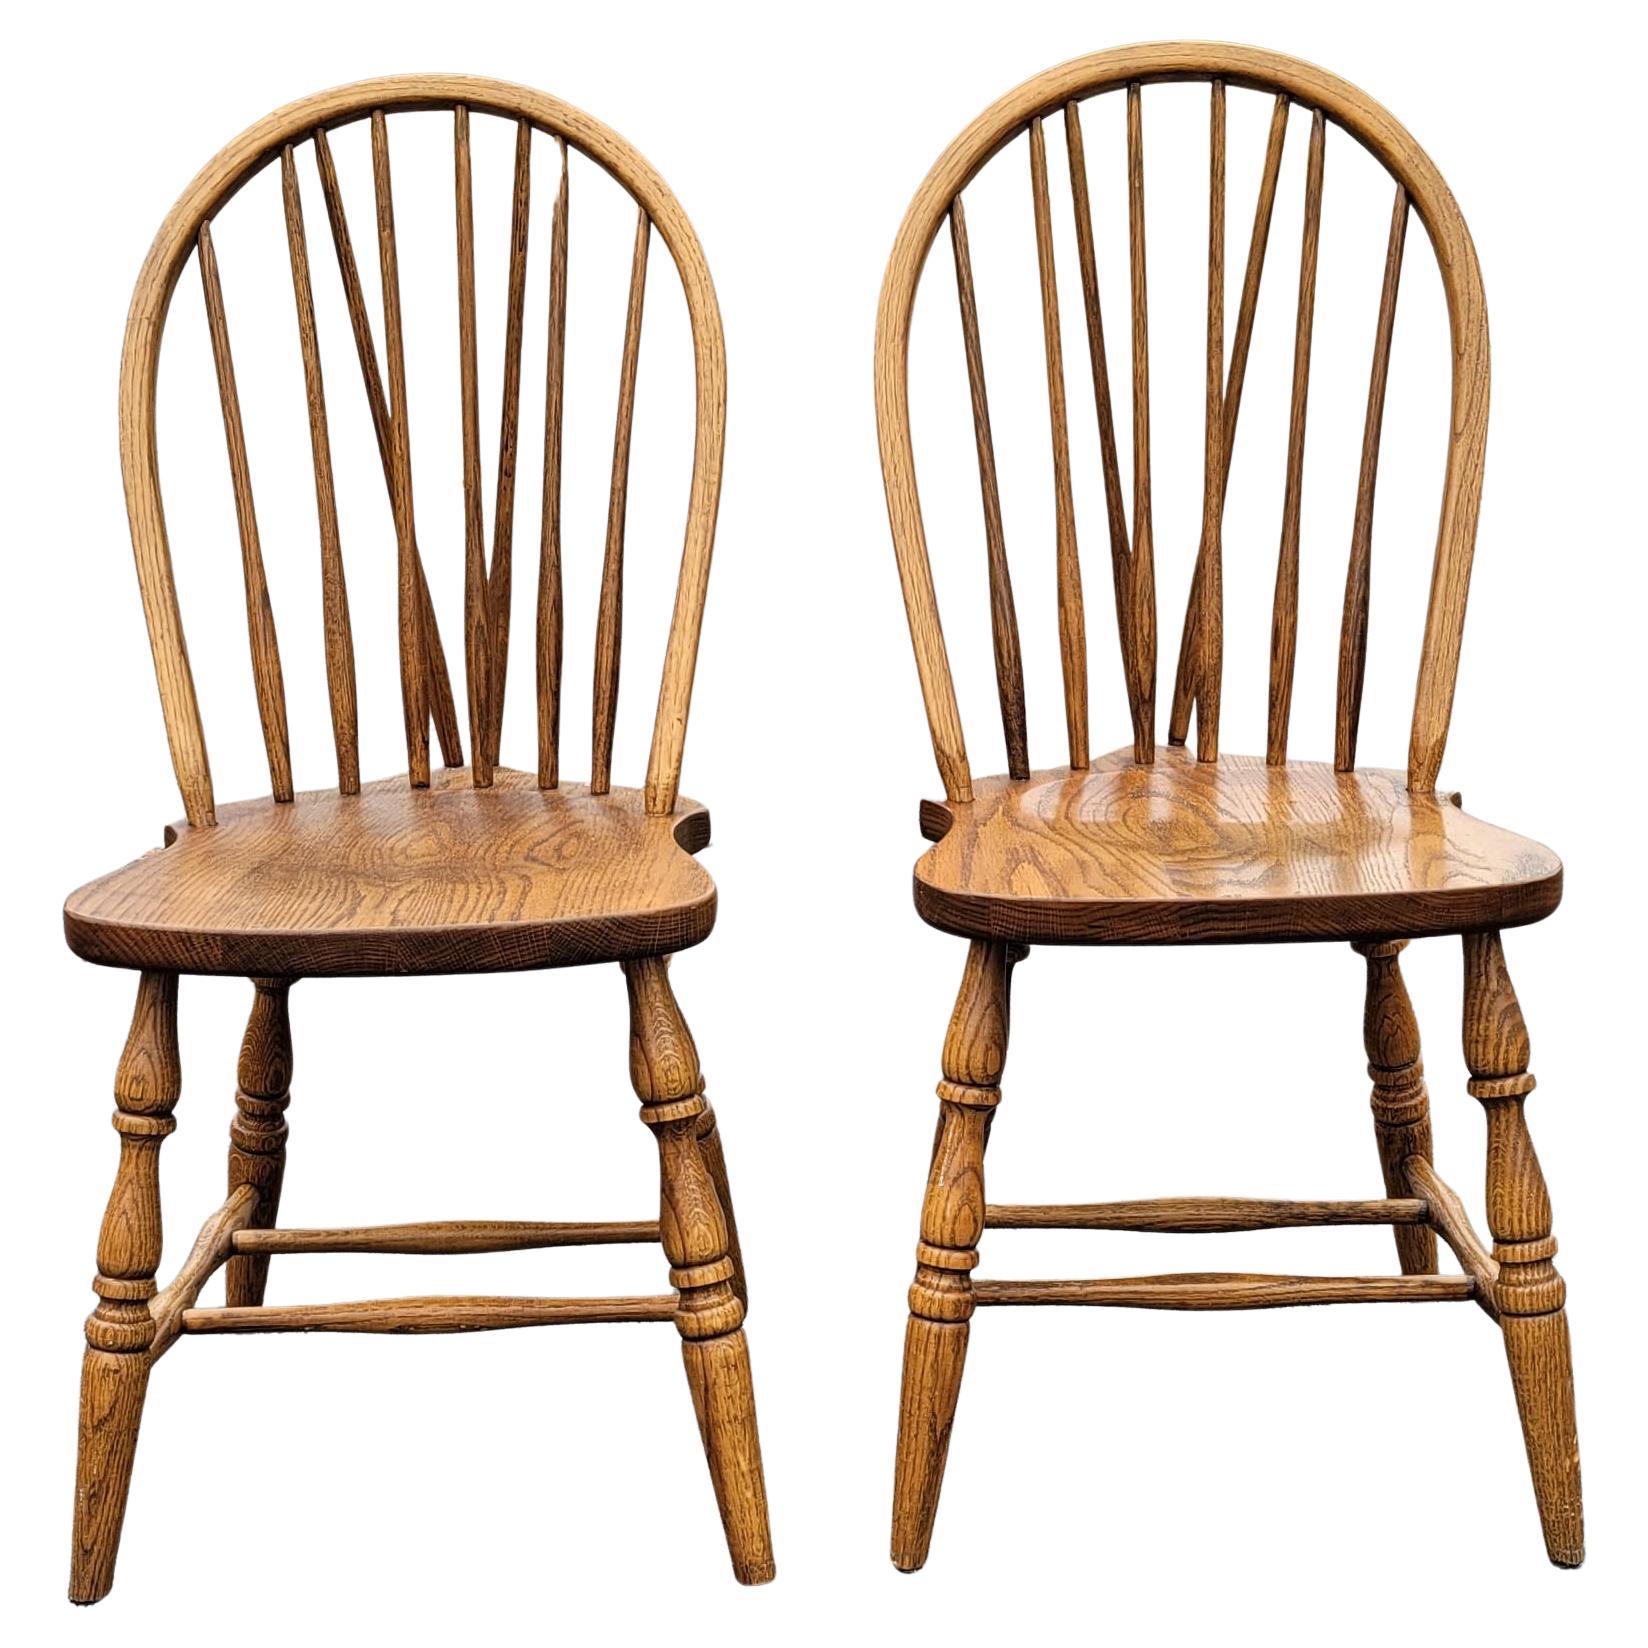 A beautiful pair of Arts & Crafts American oak fiddleback windsor chairs in great vintage condition. Chairs measure 17.5